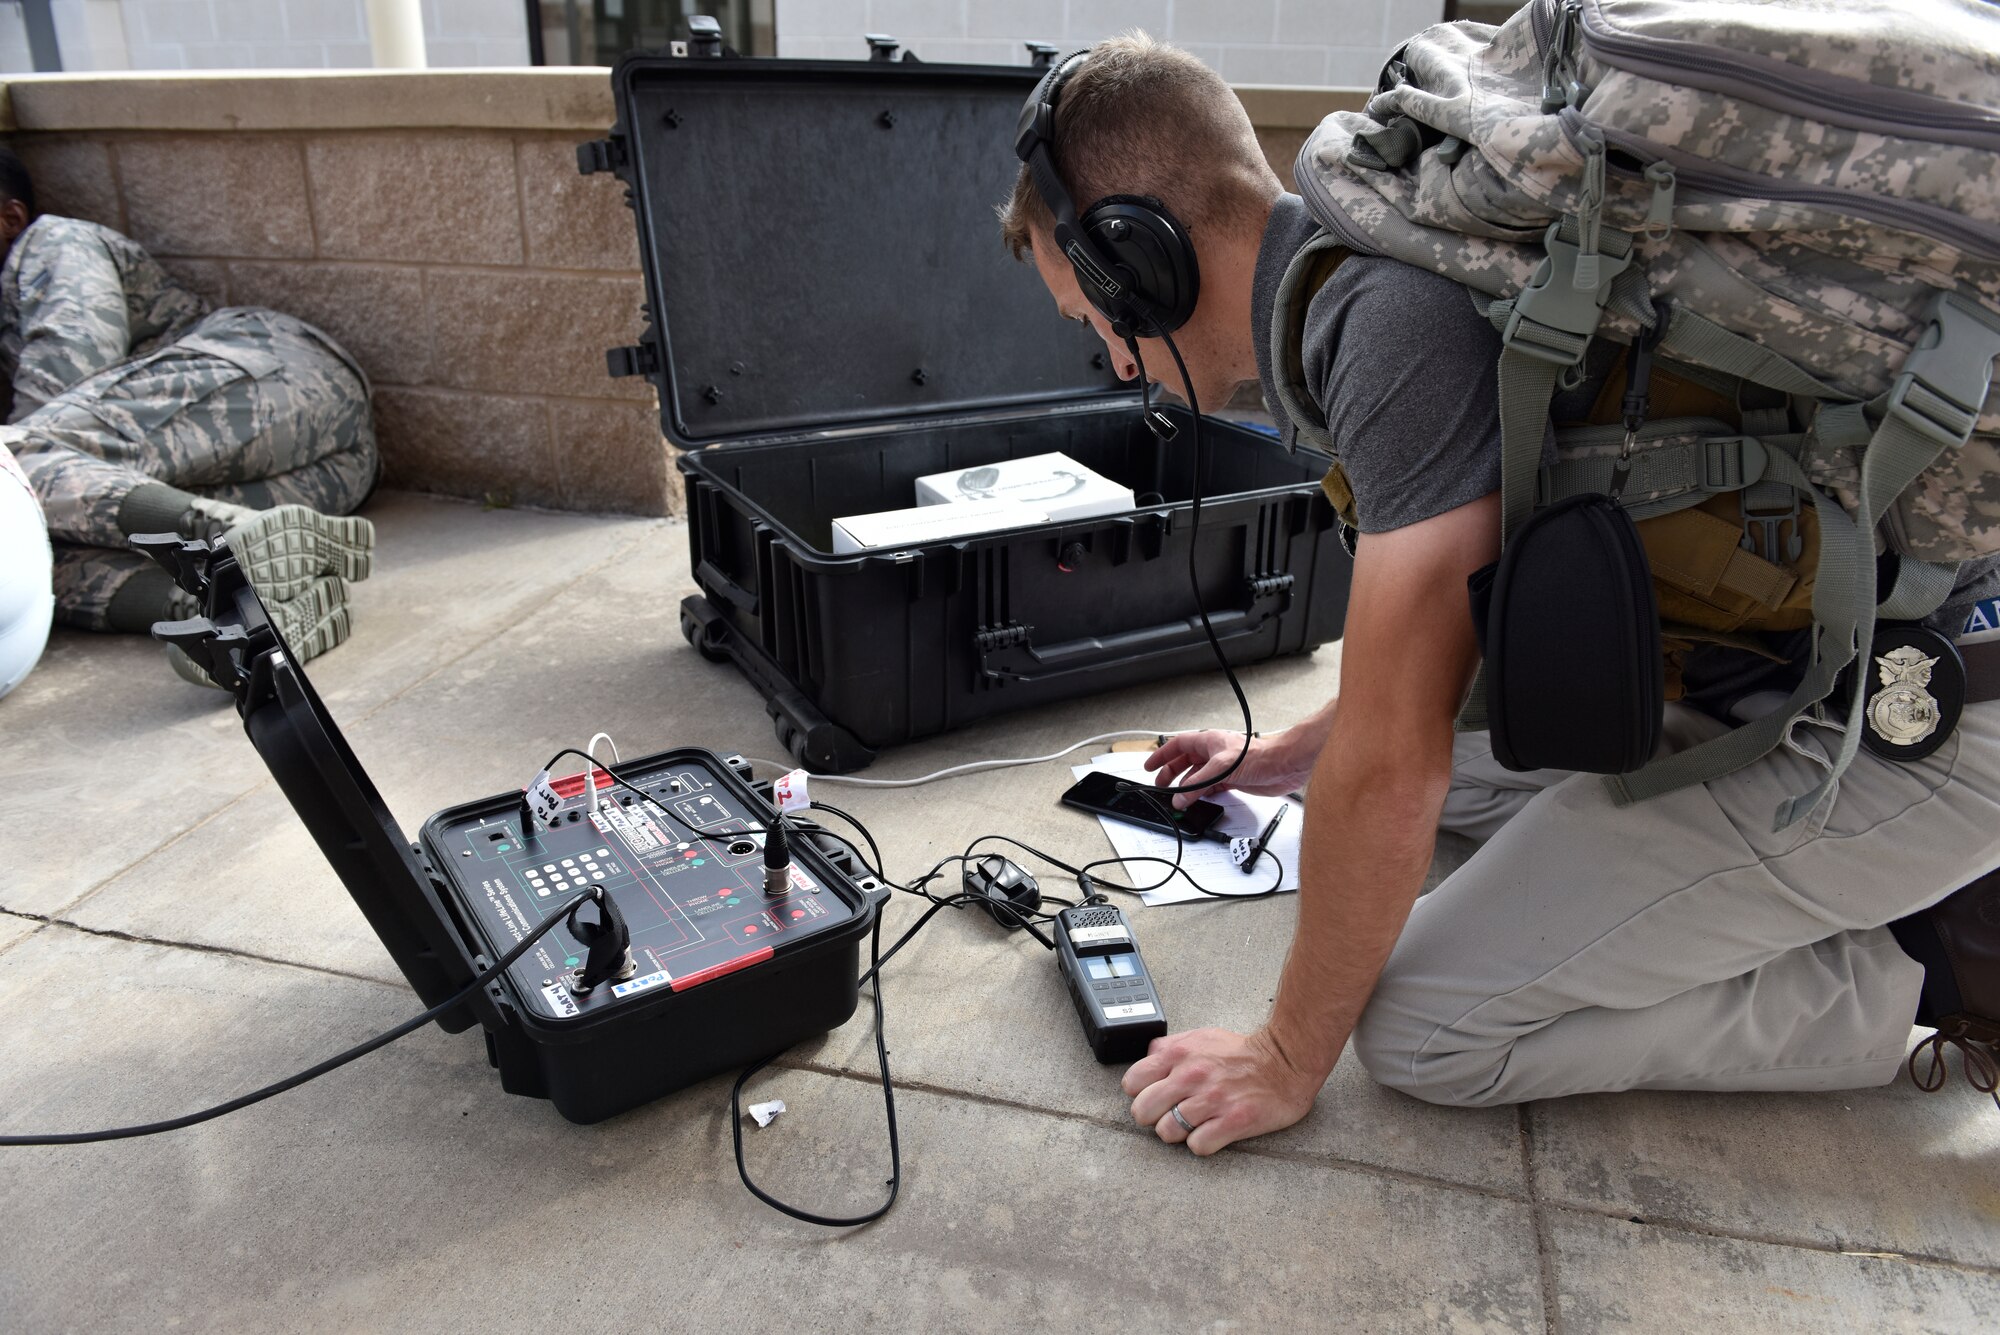 Staff Sgt. Tyler Dyer, 47th Security Forces Squadron investigator, negotiates a simulated hostage situation during an active shooter training at Laughlin Air Force Base, Texas, July 22, 2019. The response and negotiation portion of the exercise lasted for nearly two hours and was aimed at bolstering crisis readiness and response capabilities. (U.S. Air Force photo by Staff Sgt. Benjamin N. Valmoja)